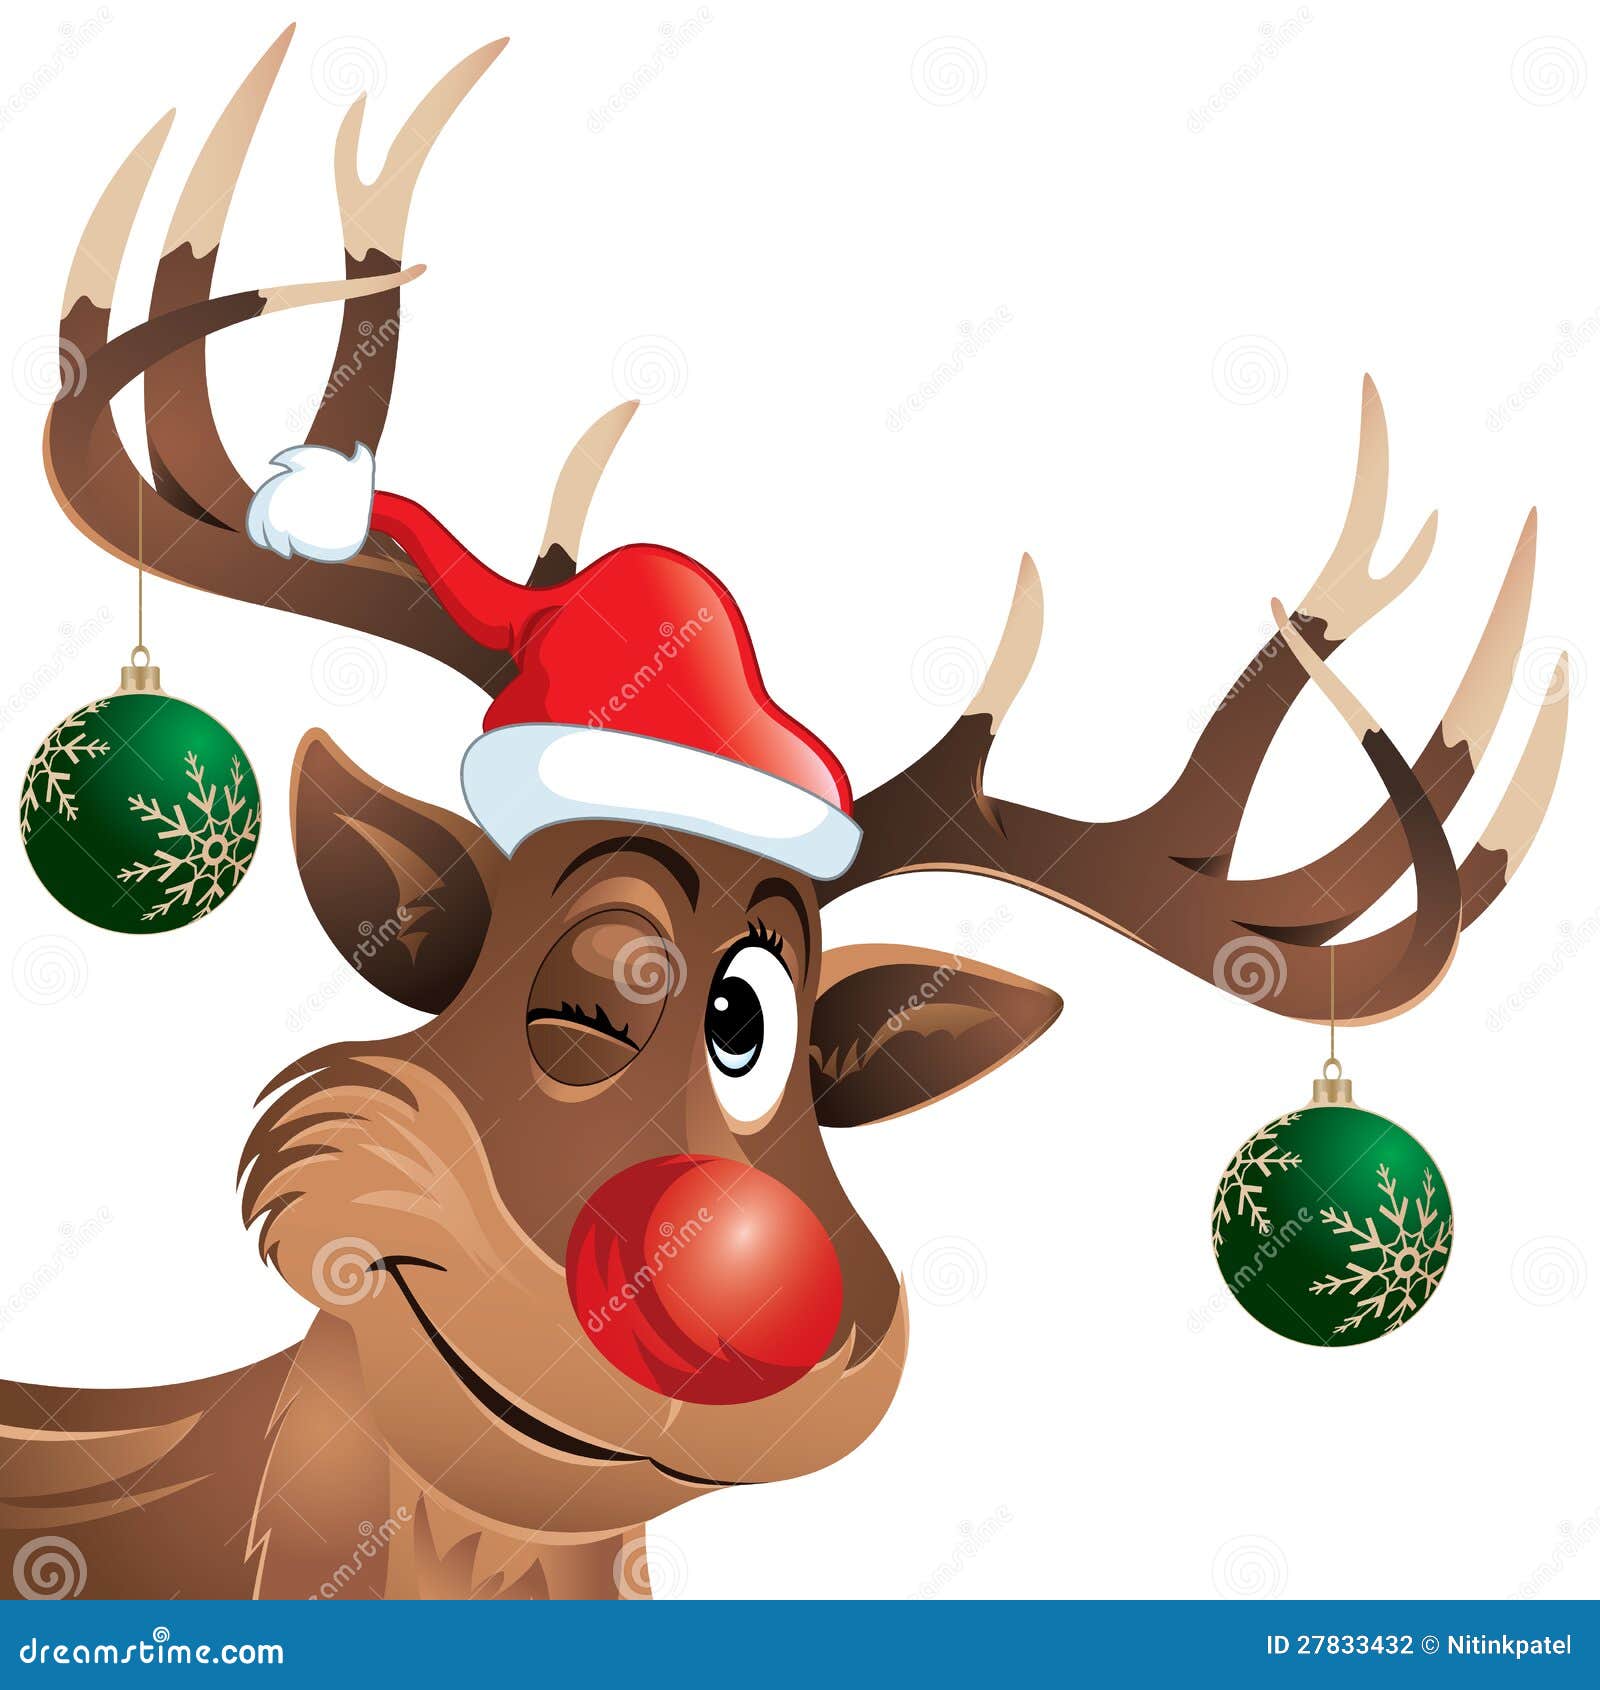 rudolph the reindeer winking with christmas balls